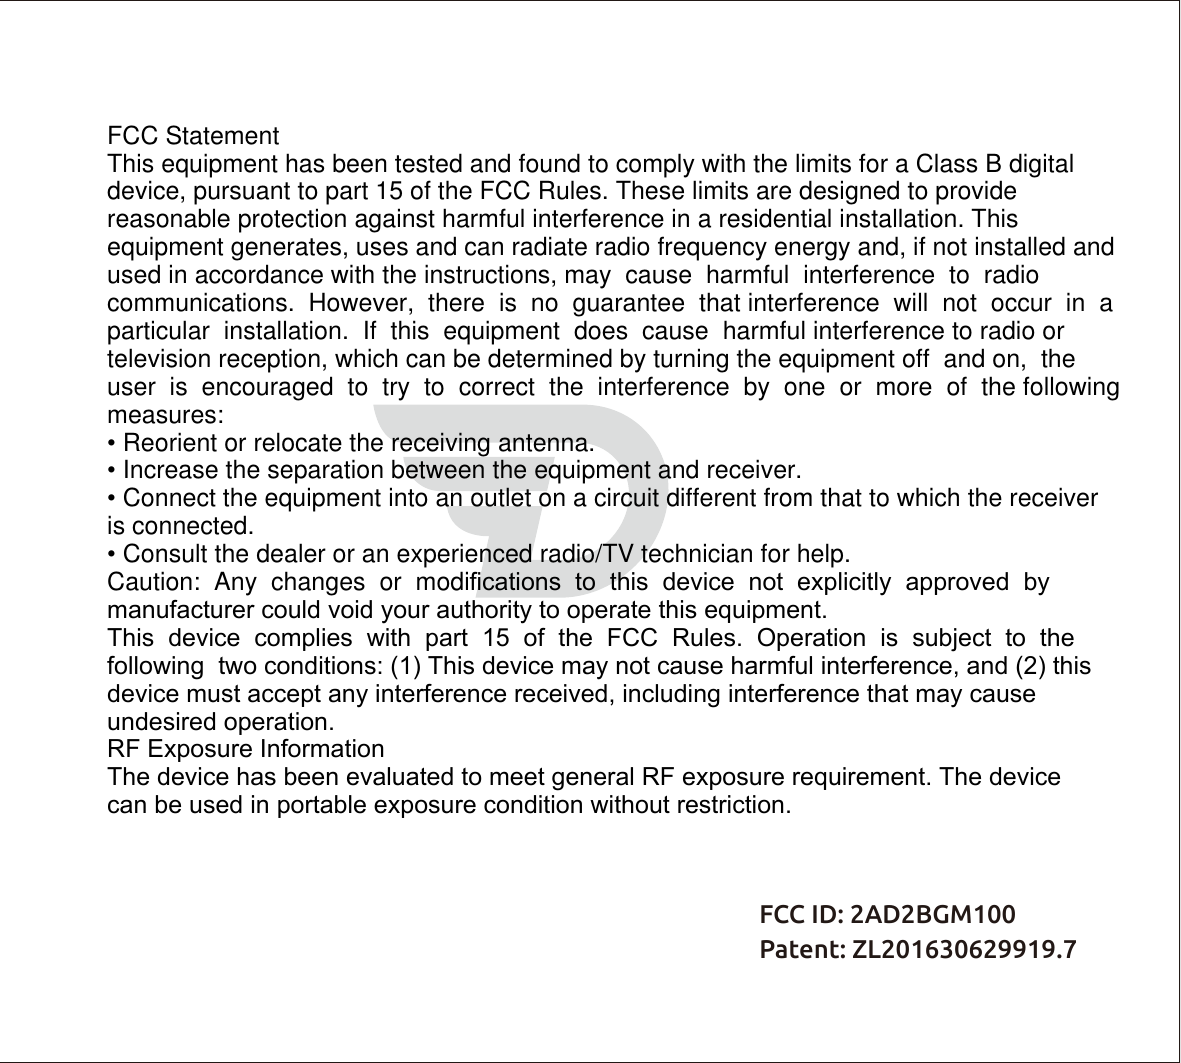 FCC ID: 2AD2BGM100  Patent: ZL201630629919.7FCC StatementThis equipment has been tested and found to comply with the limits for a Class B digital device, pursuant to part 15 of the FCC Rules. These limits are designed to provide reasonable protection against harmful interference in a residential installation. This equipment generates, uses and can radiate radio frequency energy and, if not installed and used in accordance with the instructions, may  cause  harmful  interference  to  radio  communications.  However,  there  is  no  guarantee  that interference  will  not  occur  in  a  particular  installation.  If  this  equipment  does  cause  harmful interference to radio or television reception, which can be determined by turning the equipment off  and on,  the  user  is  encouraged  to  try  to  correct  the  interference  by  one  or  more  of  the following measures:• Reorient or relocate the receiving antenna.• Increase the separation between the equipment and receiver.• Connect the equipment into an outlet on a circuit different from that to which the receiveris connected.• Consult the dealer or an experienced radio/TV technician for help.Caution:  Any  changes  or  modiﬁcations  to  this  device  not  explicitly  approved  by  manufacturer could void your authority to operate this equipment.This  device  complies  with  part  15  of  the  FCC  Rules.  Operation  is  subject  to  the  following  two conditions: (1) This device may not cause harmful interference, and (2) this device must accept any interference received, including interference that may cause undesired operation.RF Exposure InformationThe device has been evaluated to meet general RF exposure requirement. The device can be used in portable exposure condition without restriction.